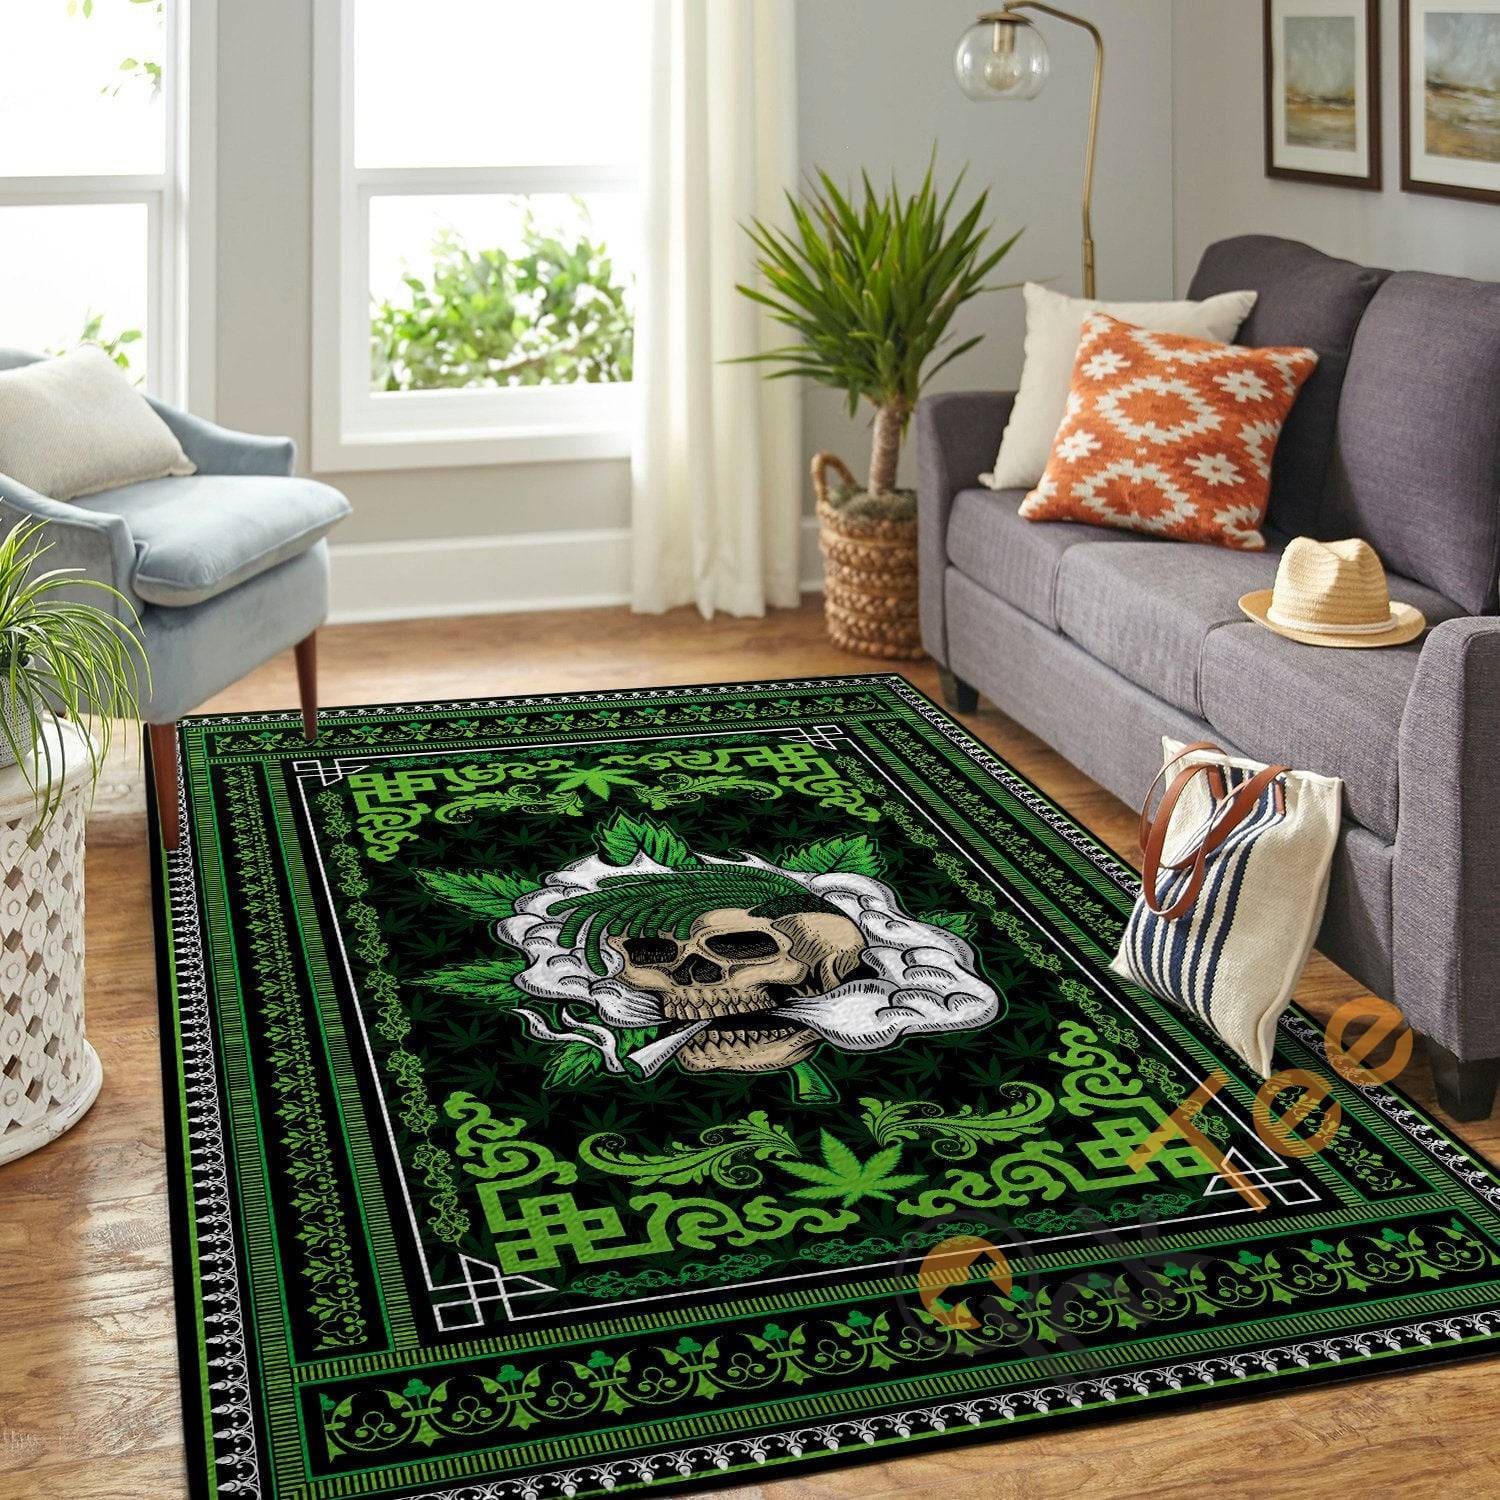 A Skull With Cannabis In Green Background Hippie Cool Carpet Floor Decor Soft Livingroom Bedroom Highlight For Home Rug